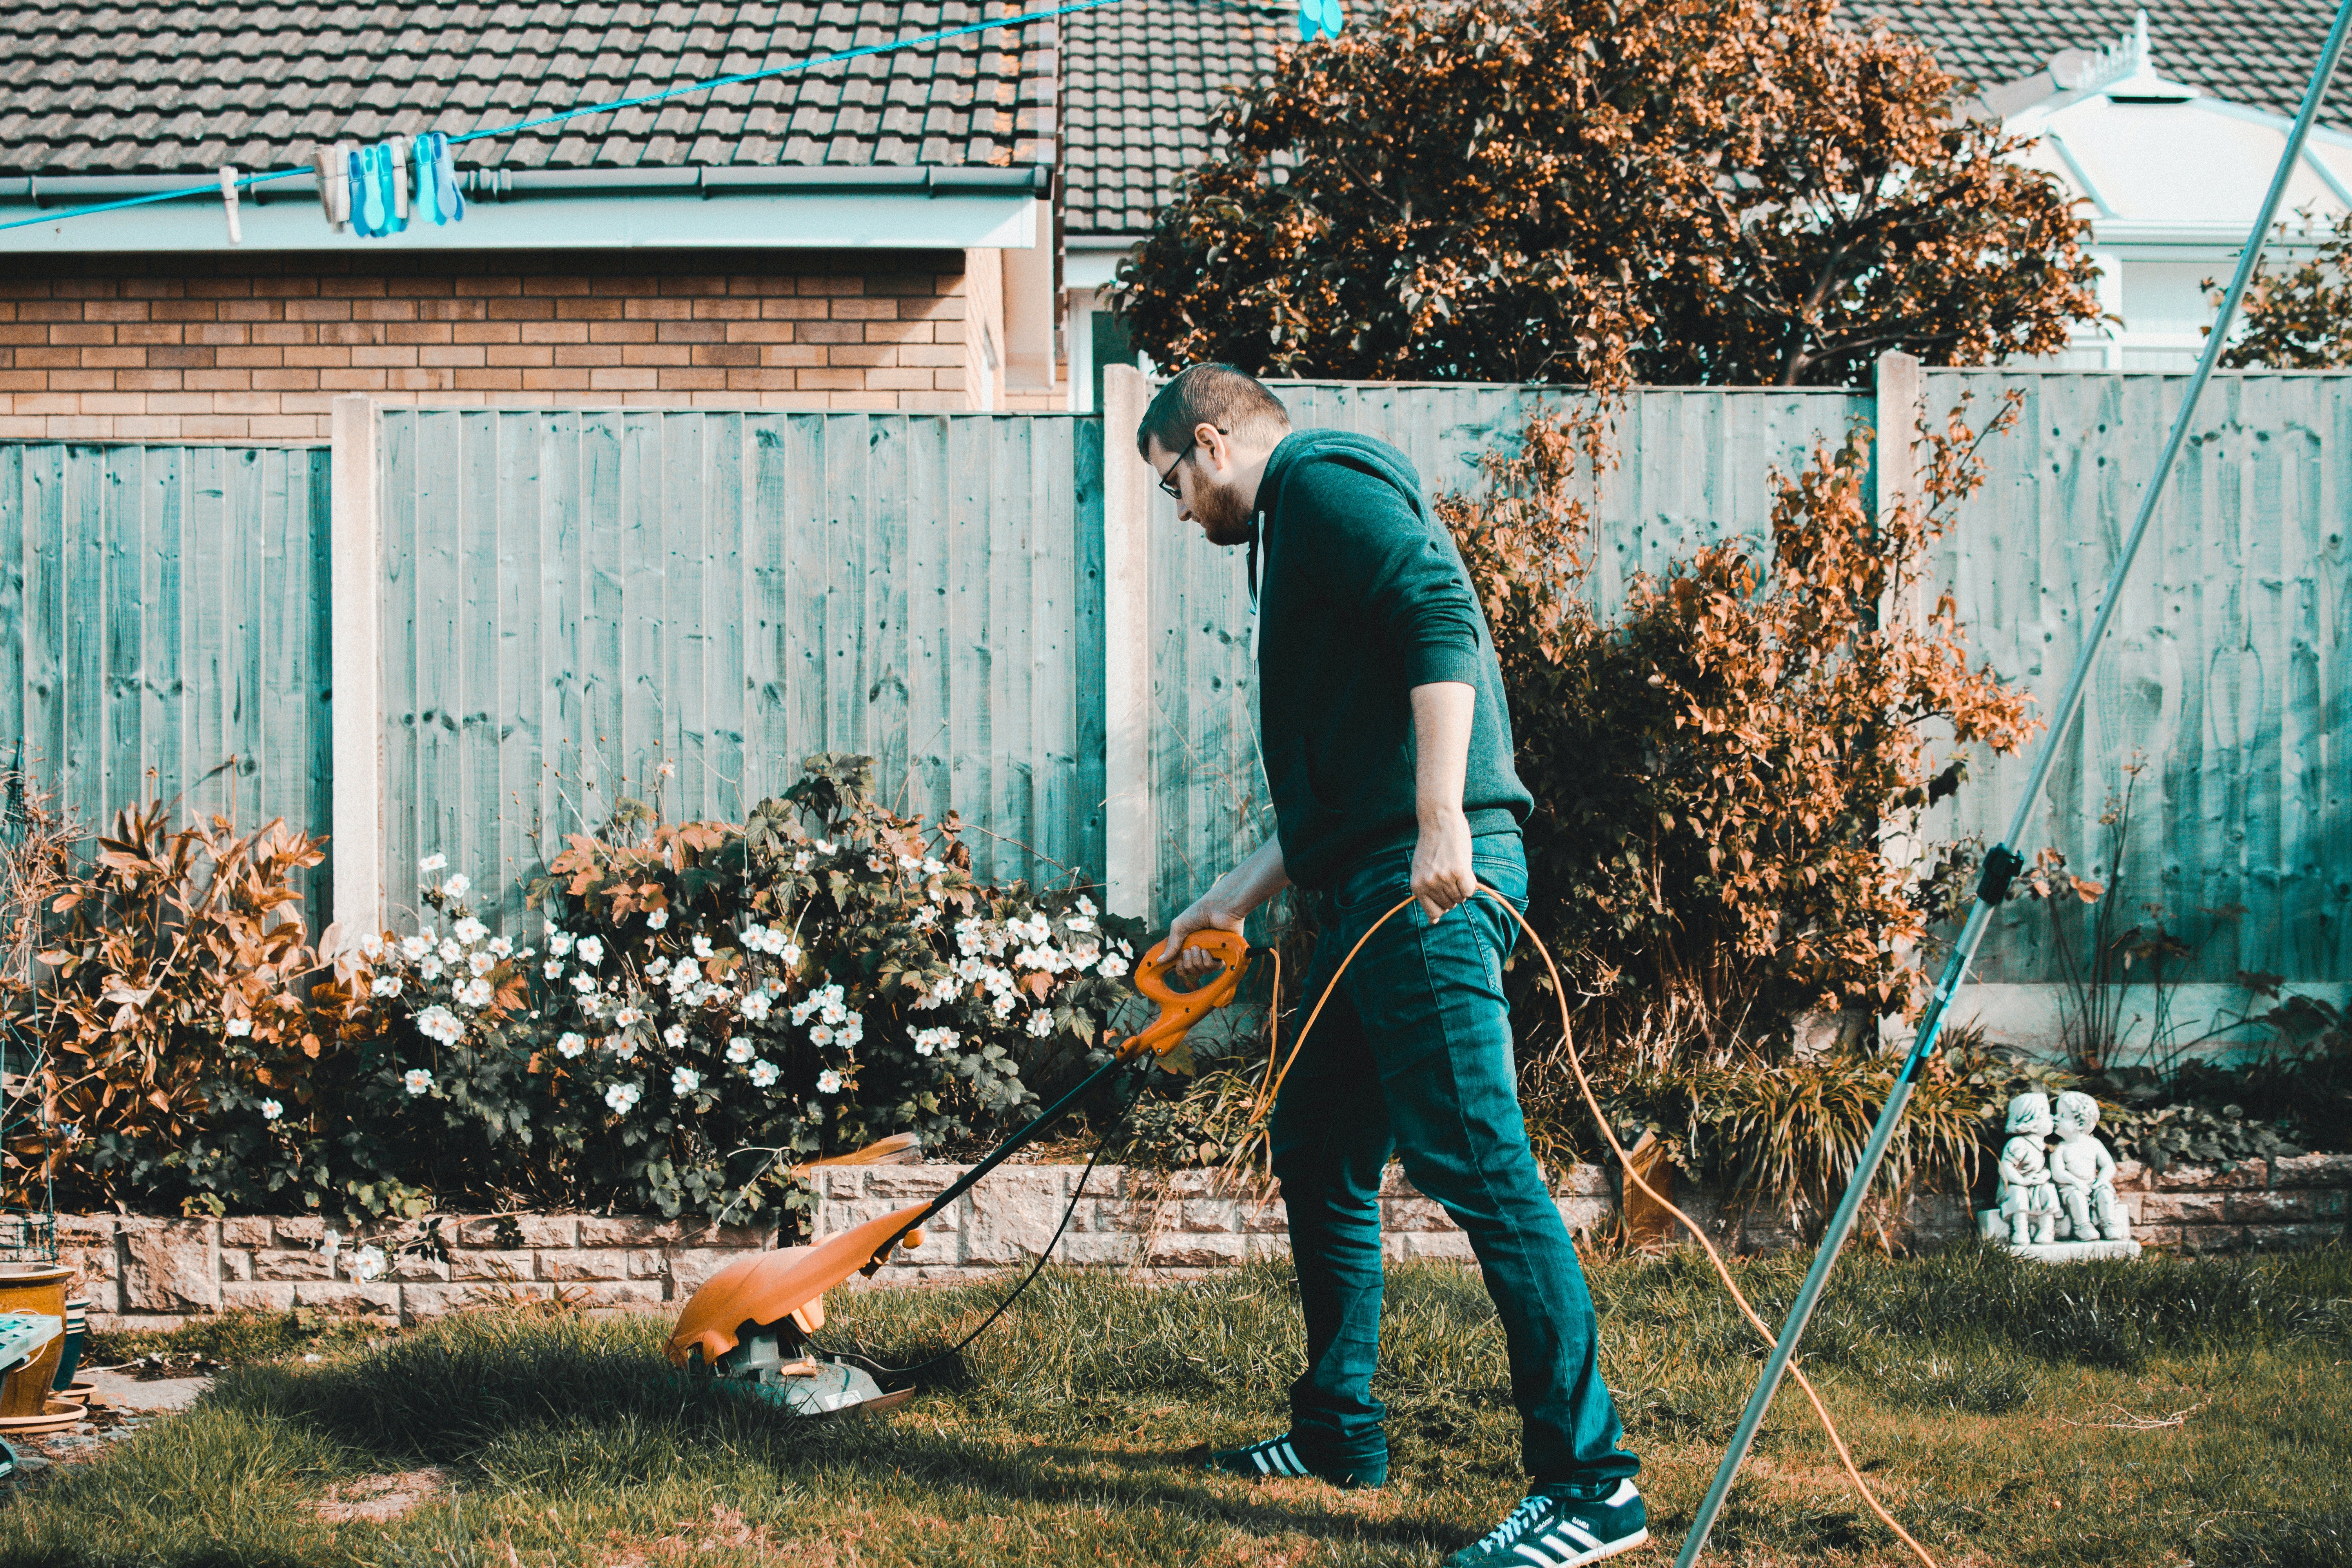 Mary and Evan were surprised to see people mowing their lawn. | Source: Pexels